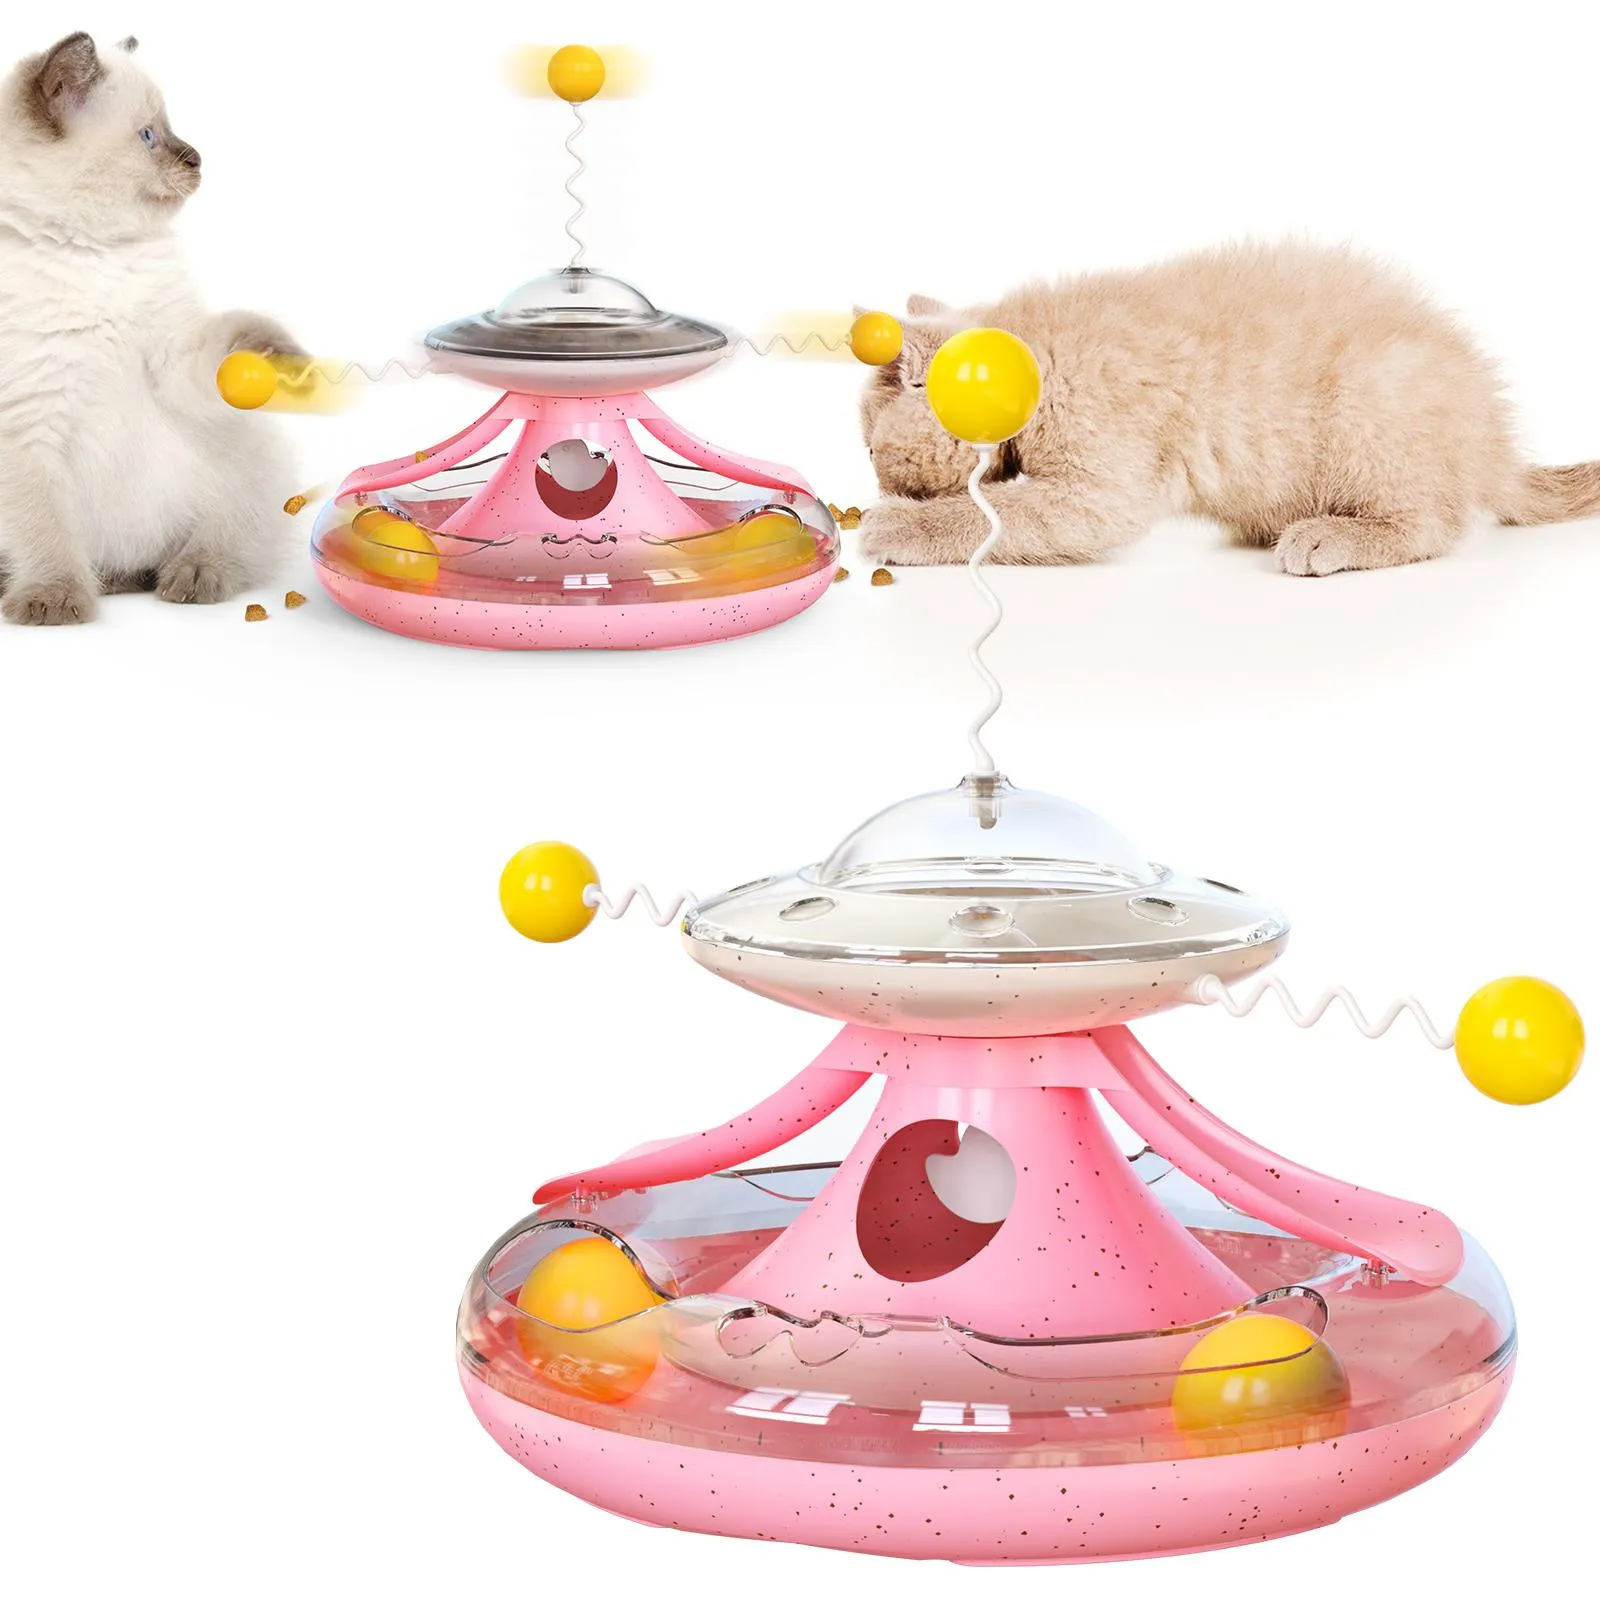 Toys Cat Stuff Interactive Puzzle Game With Whirligig Turntable Kitten Smart Cat Pet Toys Accessories High Quality Training Wheel